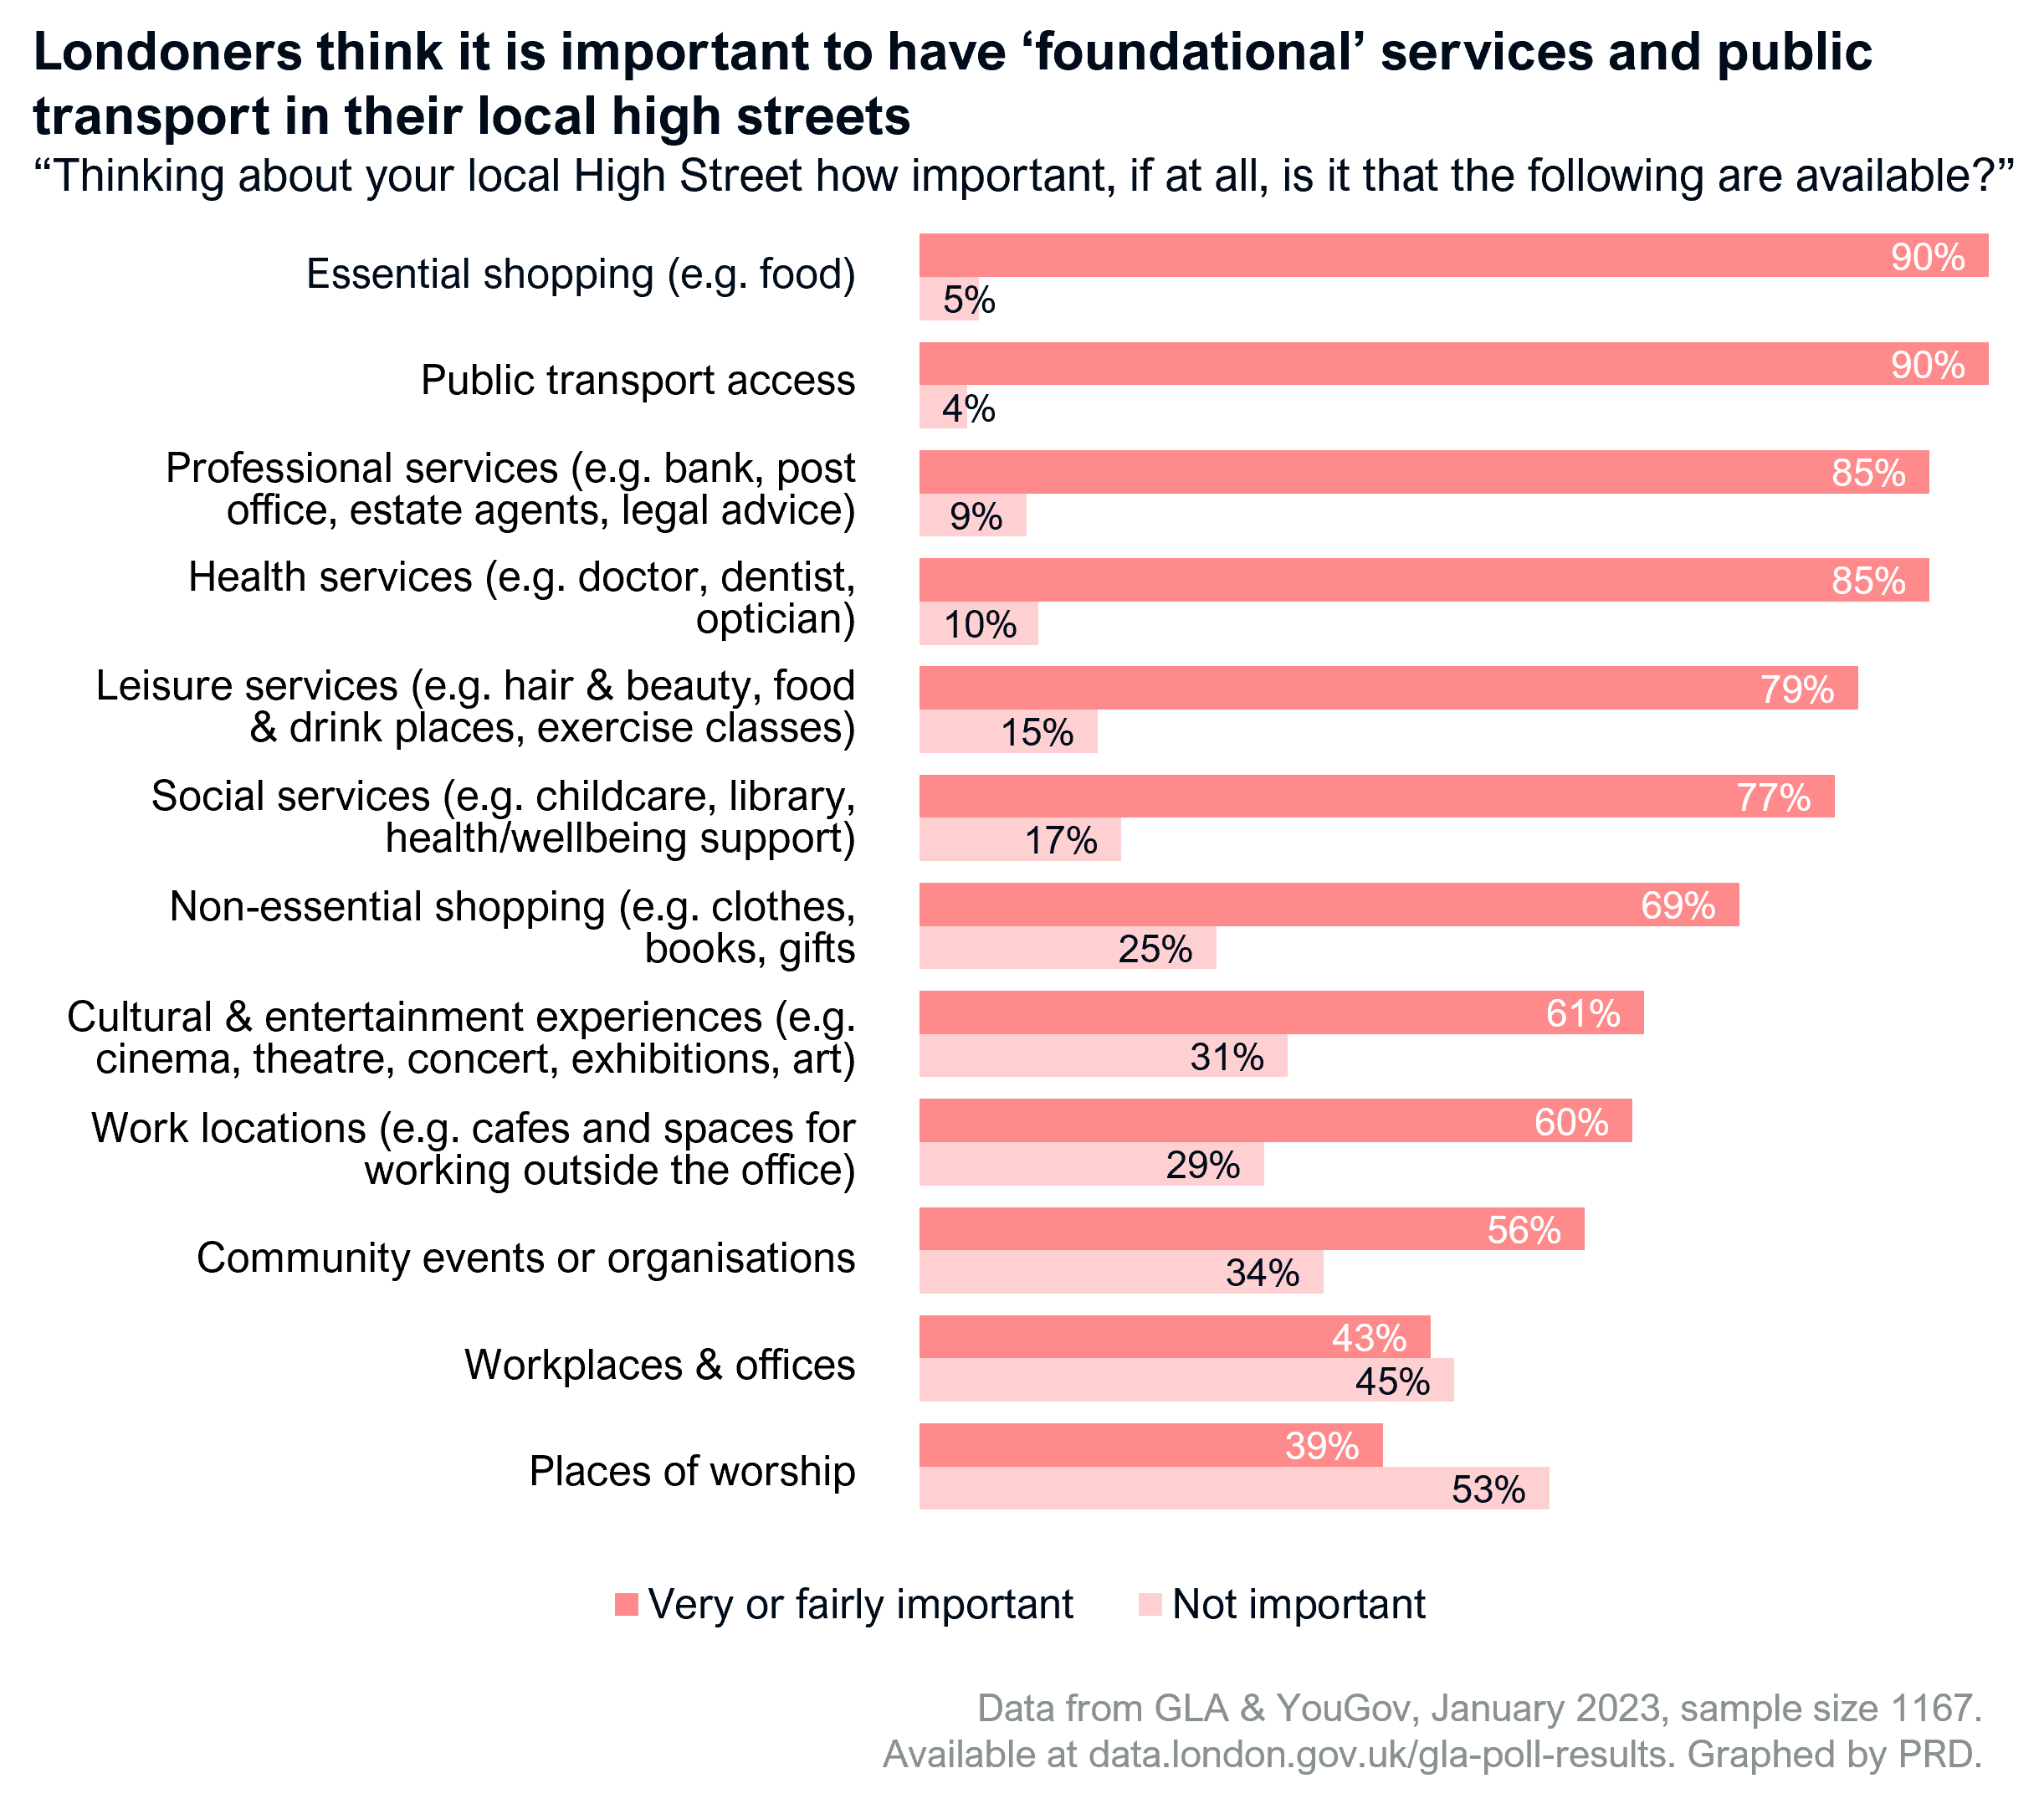 A bar graph showing responses from 1167 Londoners to the question of how important different amenities are. essential shopping such as for food and public transport access are important or very important for 90% of respondents. professional services such as banks and post offices, and health services such as doctors, dentists, and opticians, are important or very important for 85% of respondents.